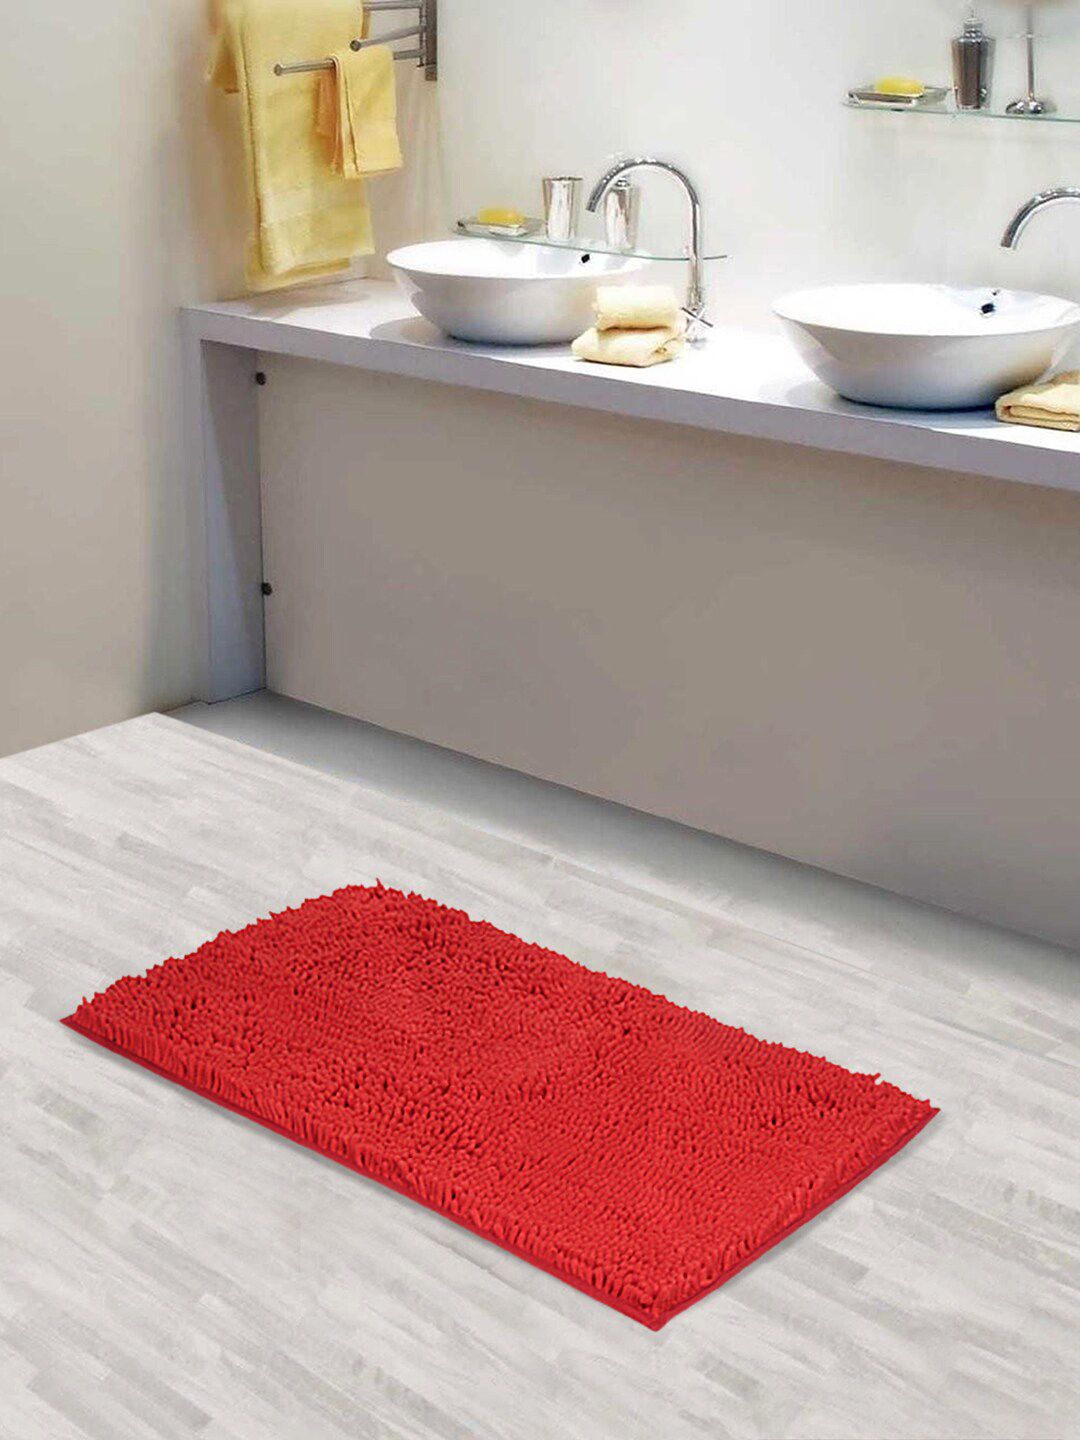 Lushomes Red Textured 2200 GSM Anti-Skid Bath Rug Price in India